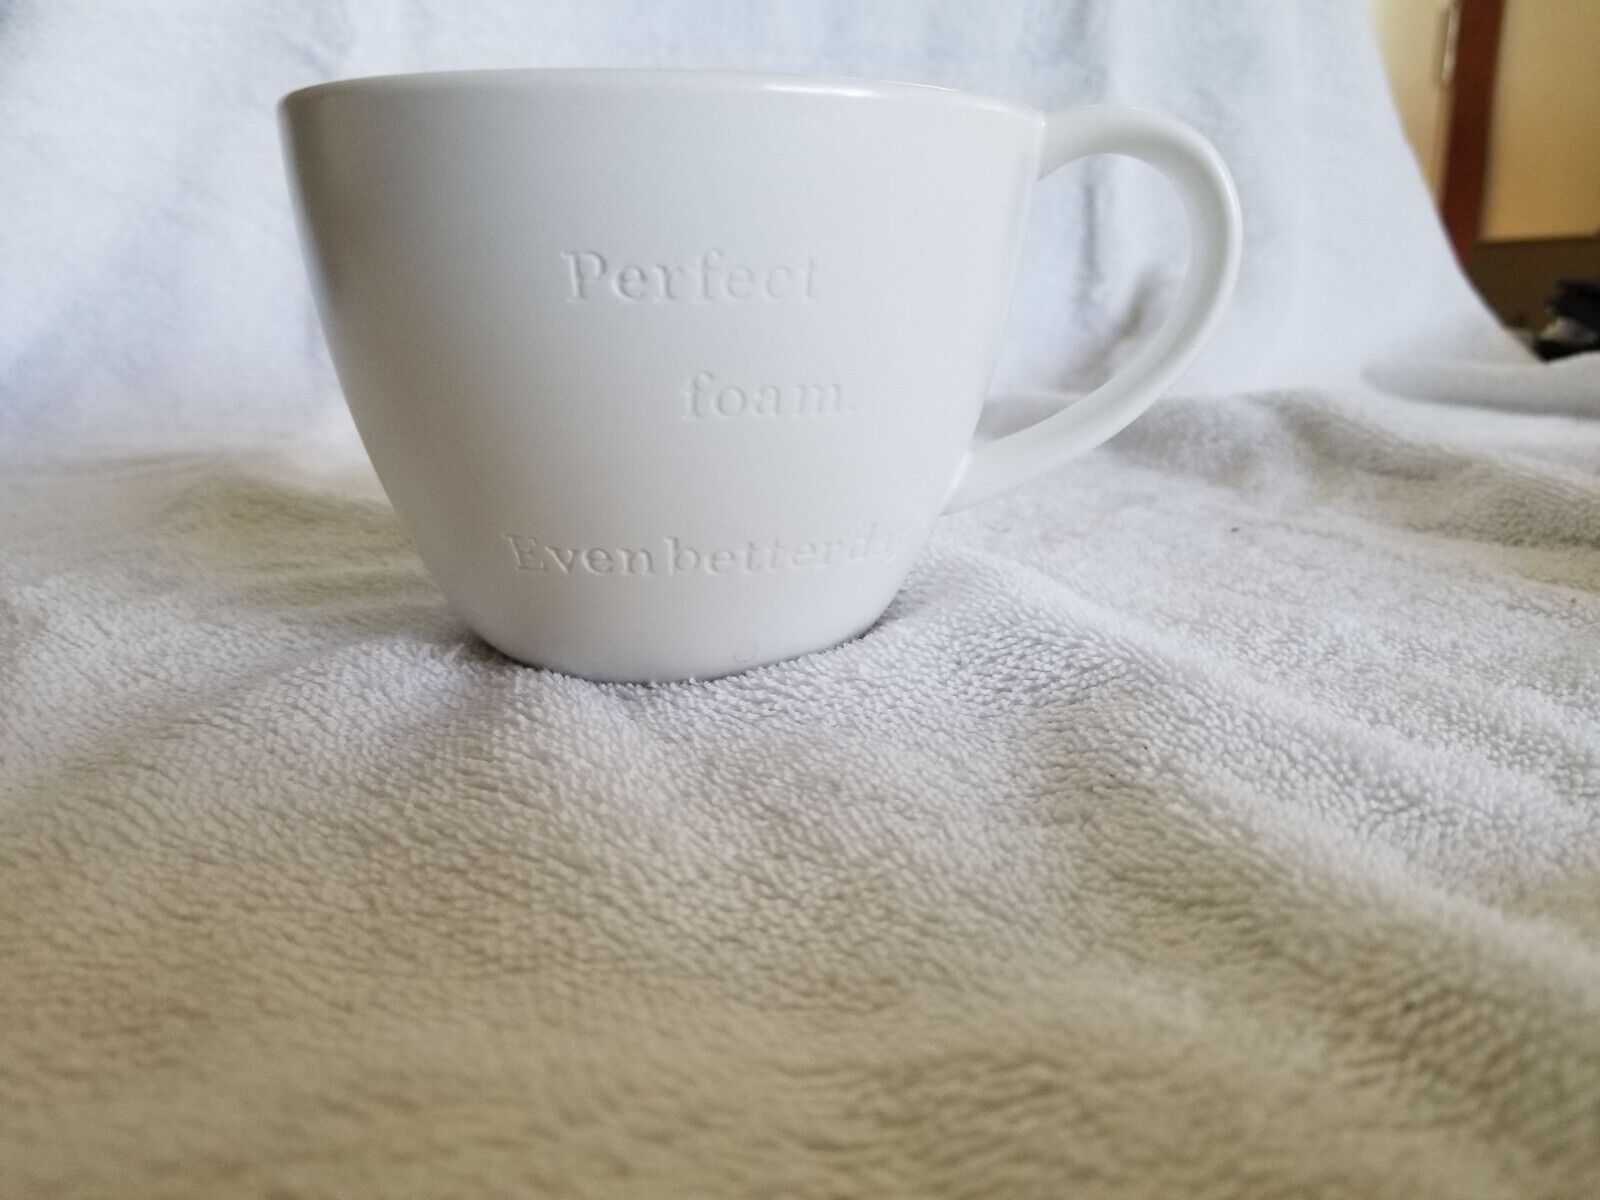 Starbucks Coffee 2013 Perfect Foam Even Better Day Etched Latte Mug Cup 12 Oz.